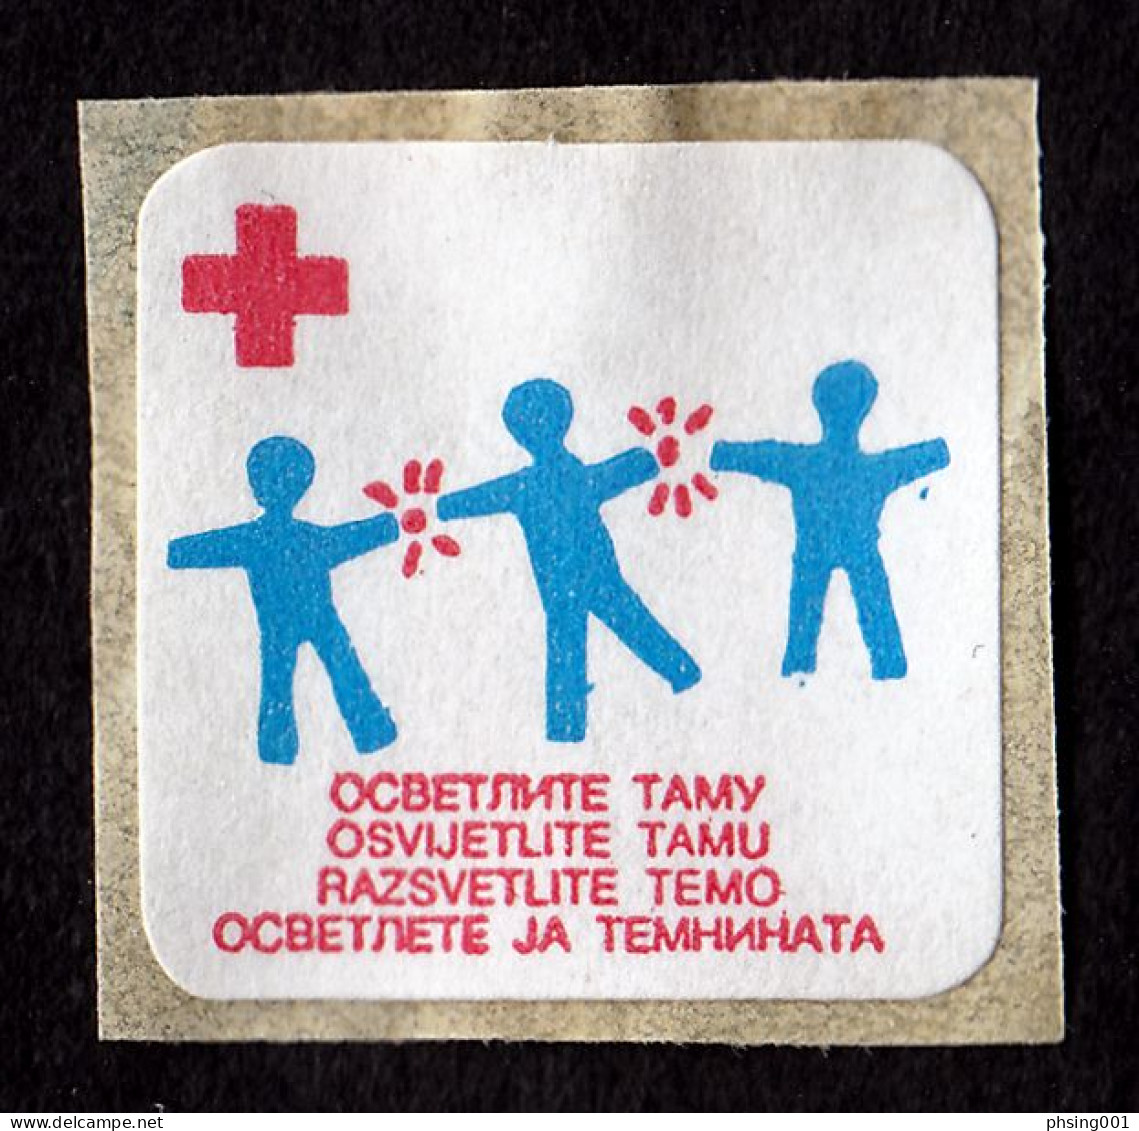 Yugoslavia 1991 Red Cross Croix Rouge Rotes Kreuz Tax Charity Surcharge Self Adhesive Stamp MNH - Strafport